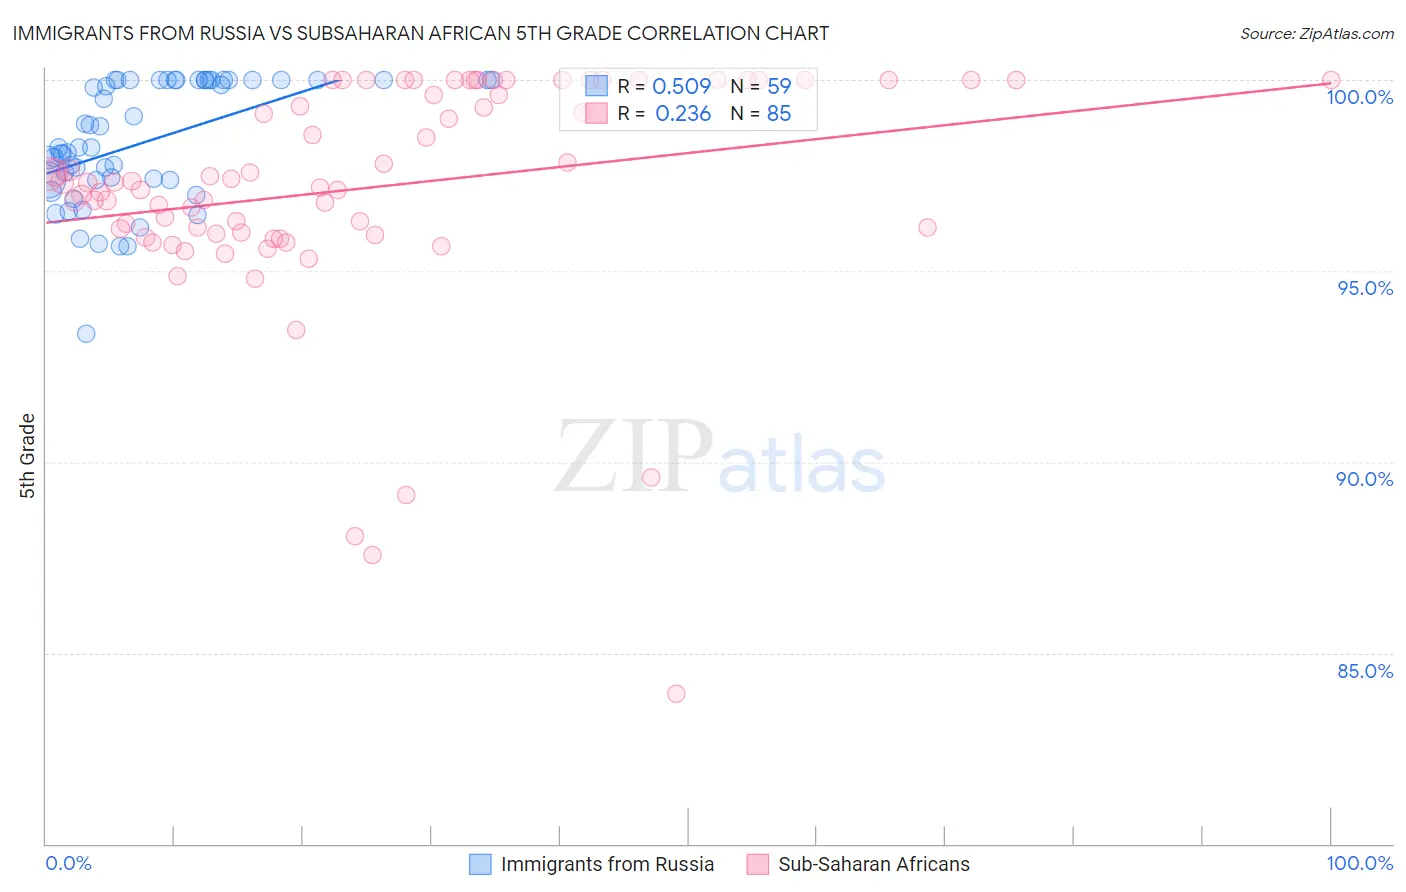 Immigrants from Russia vs Subsaharan African 5th Grade